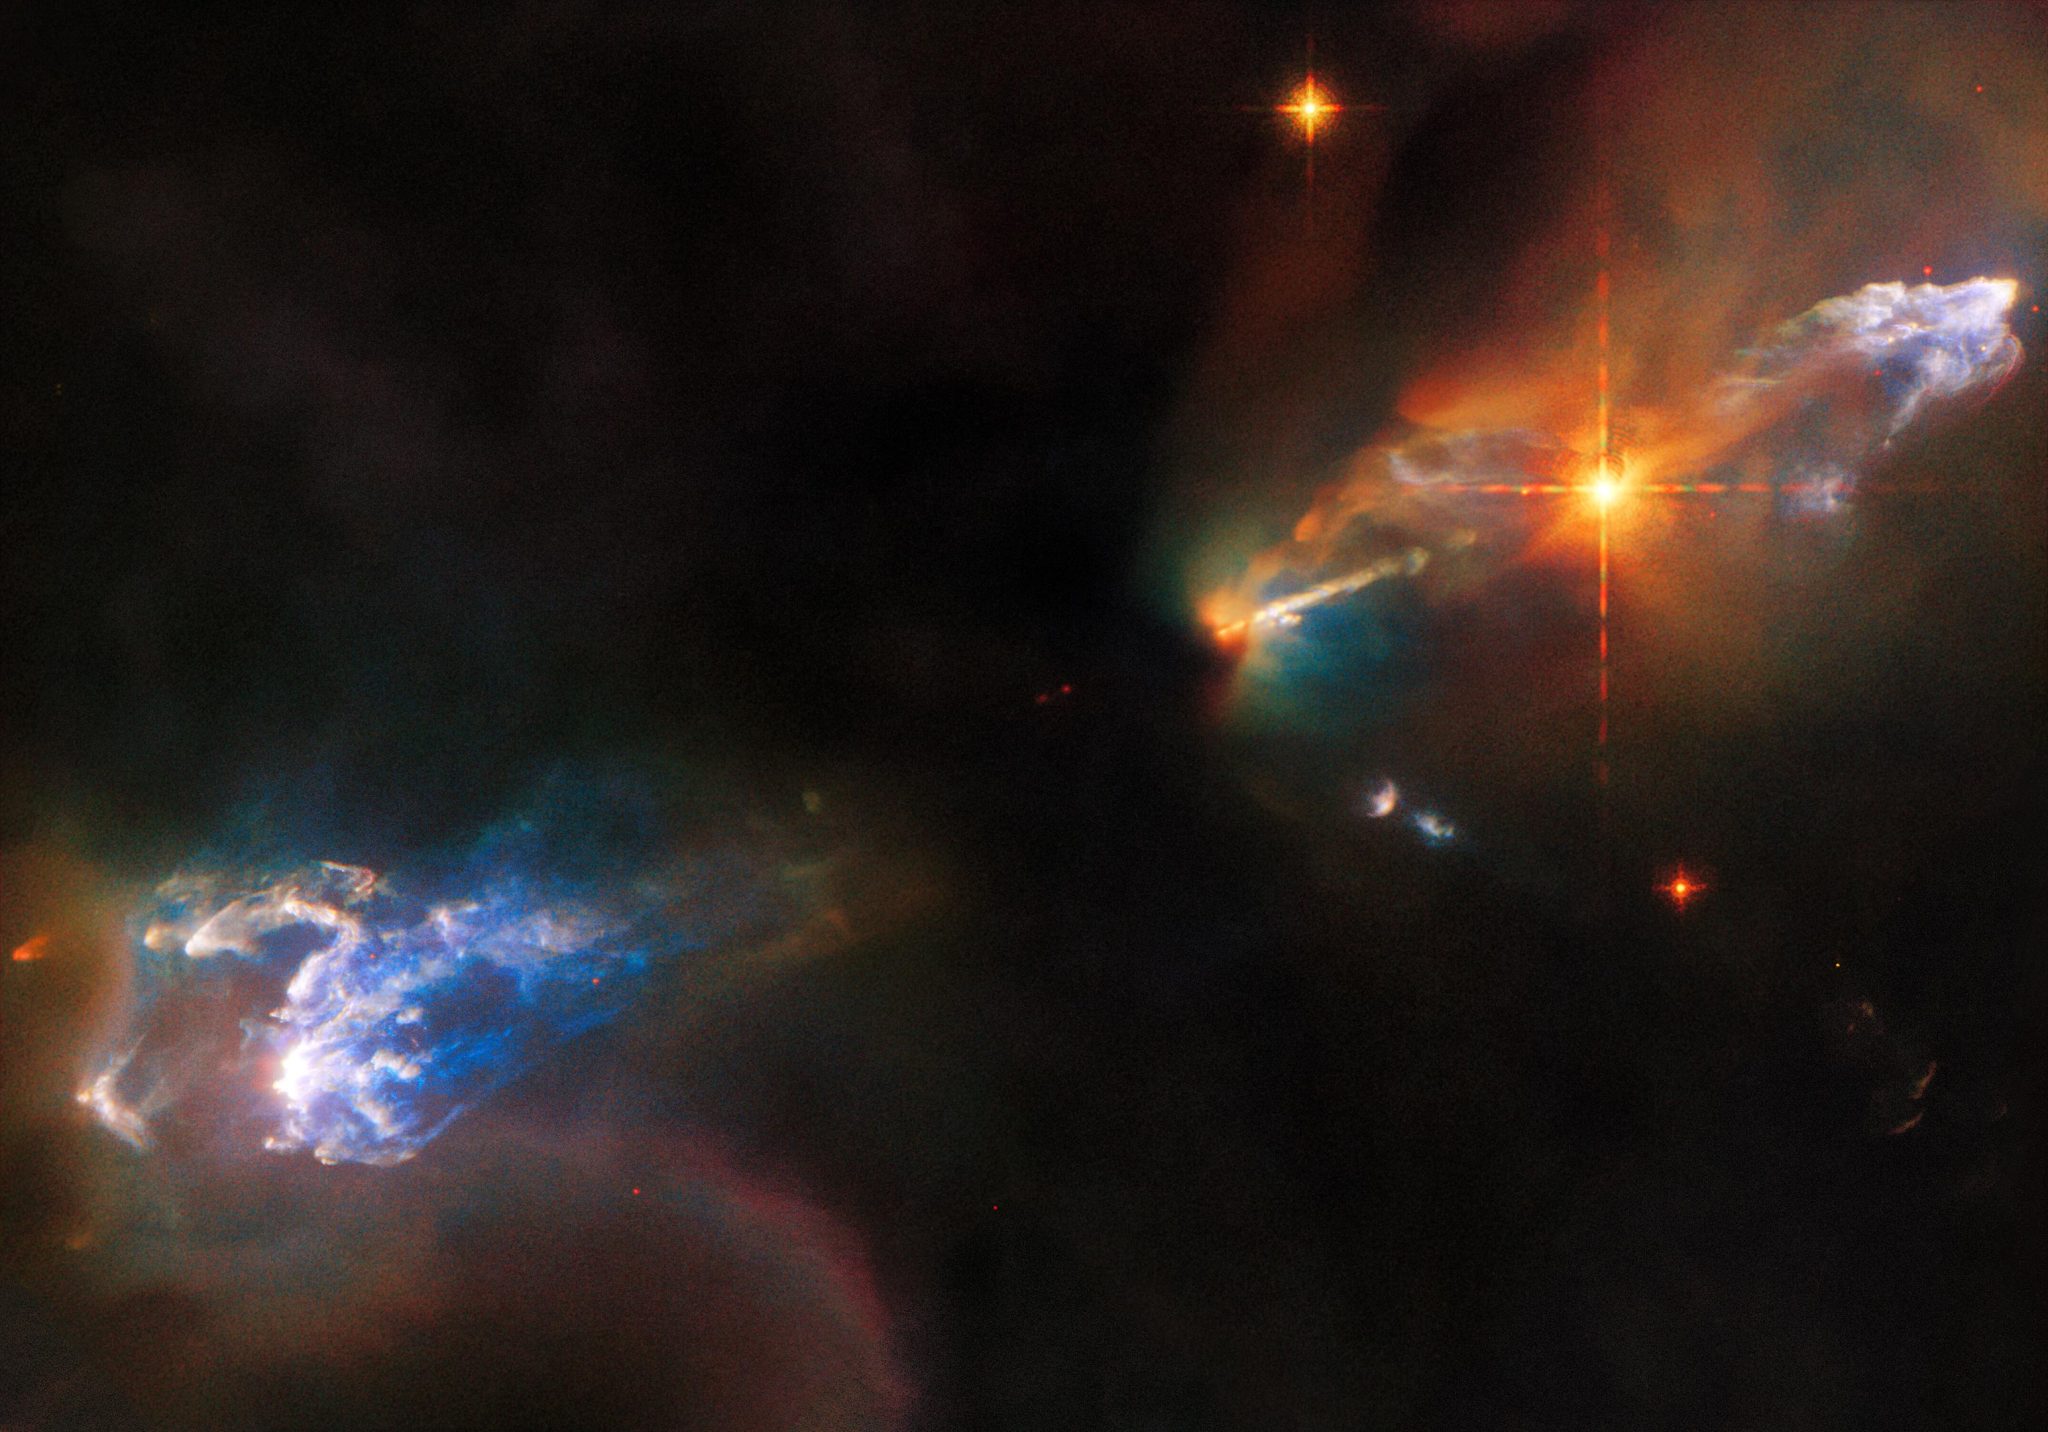 Hubble Herbig-Haro Objects HH 1 and HH 2